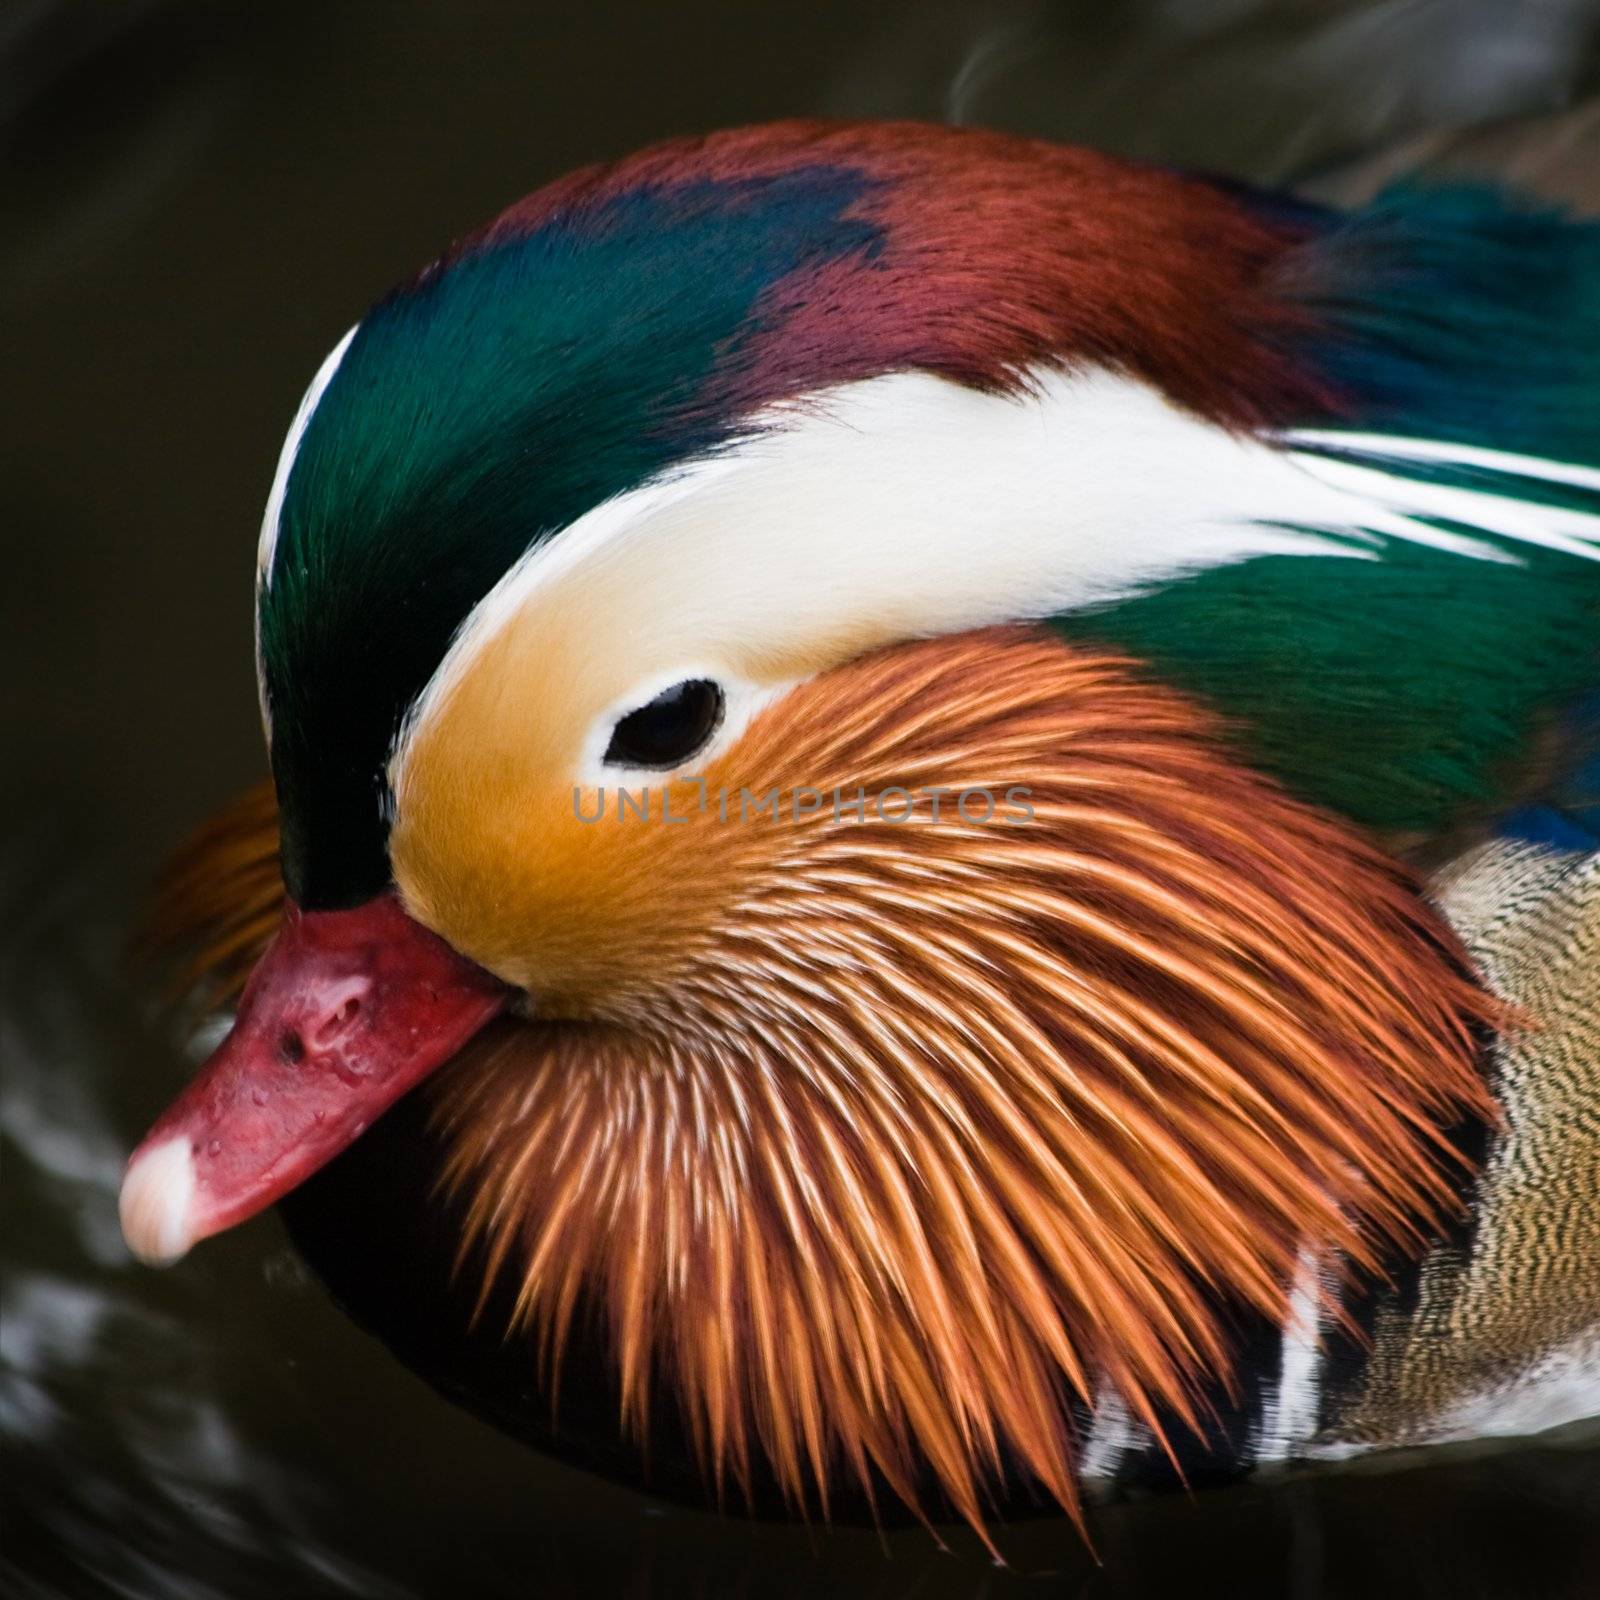 Head of Mandarin duck in close view- square cropped image